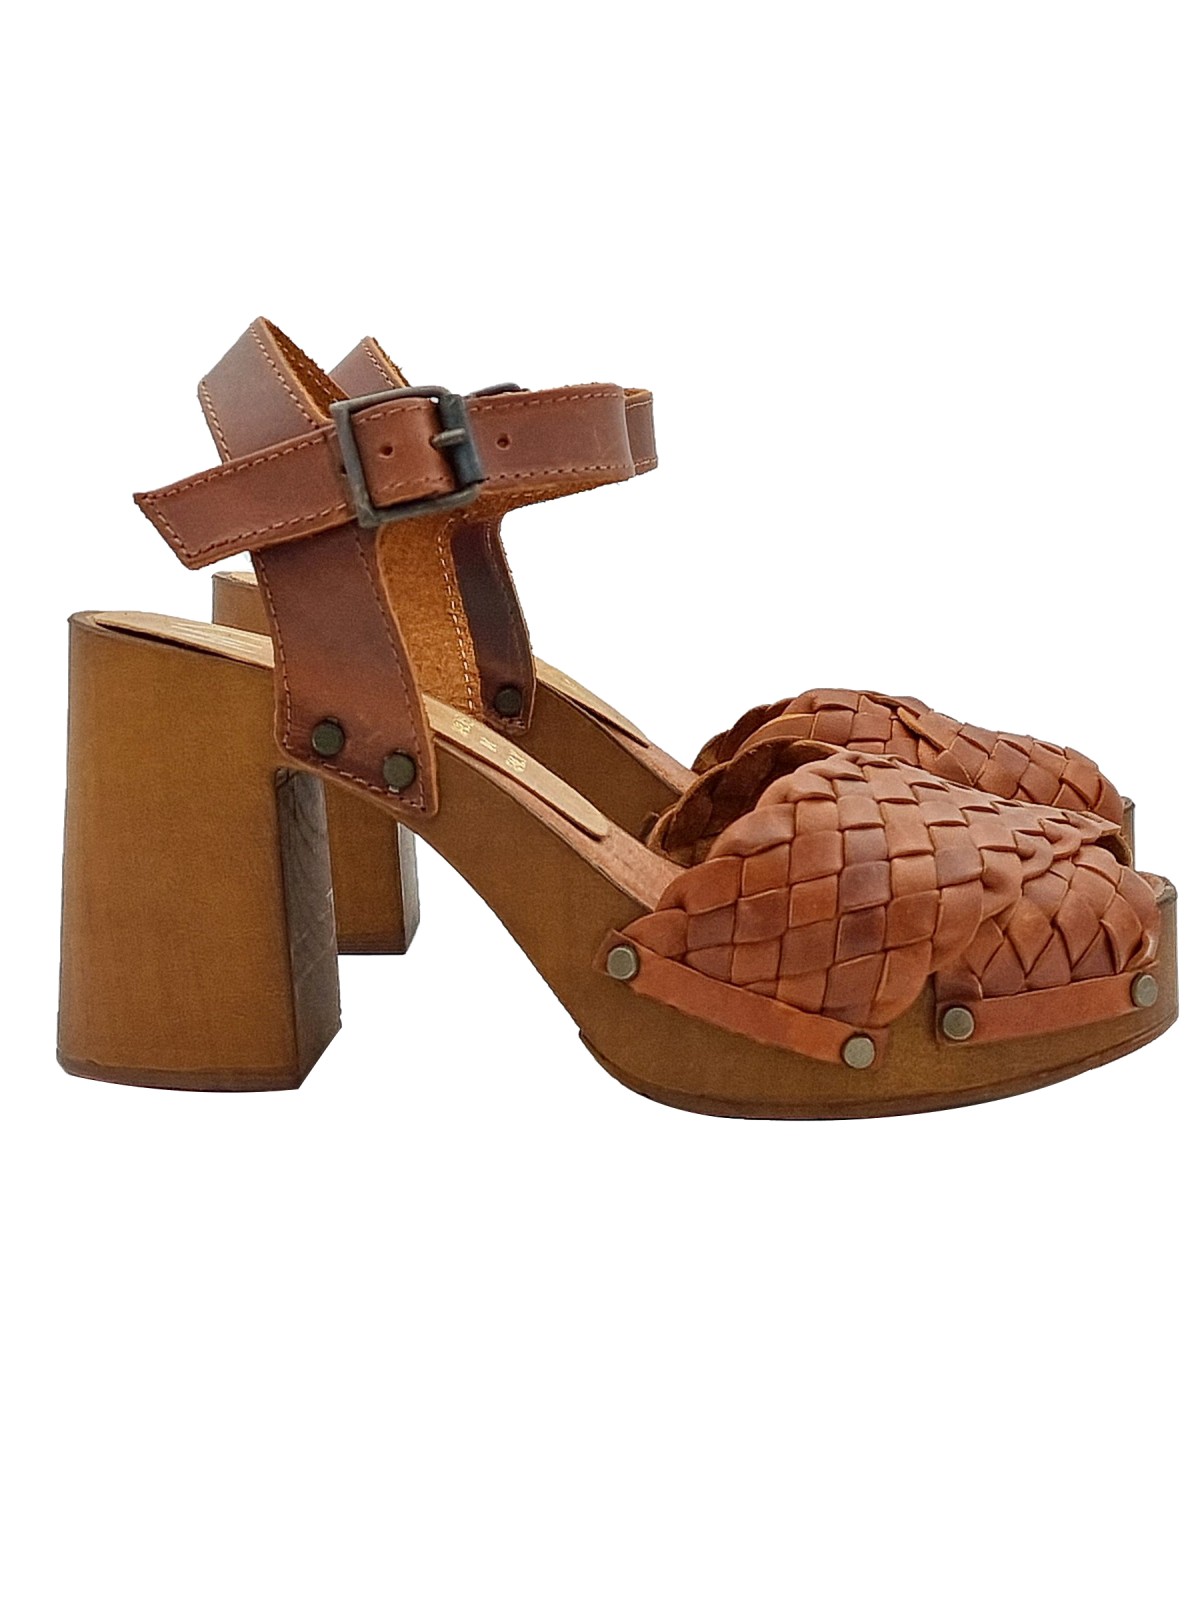 BROWN WOVEN CLOGS WITH 9 CM HEEL